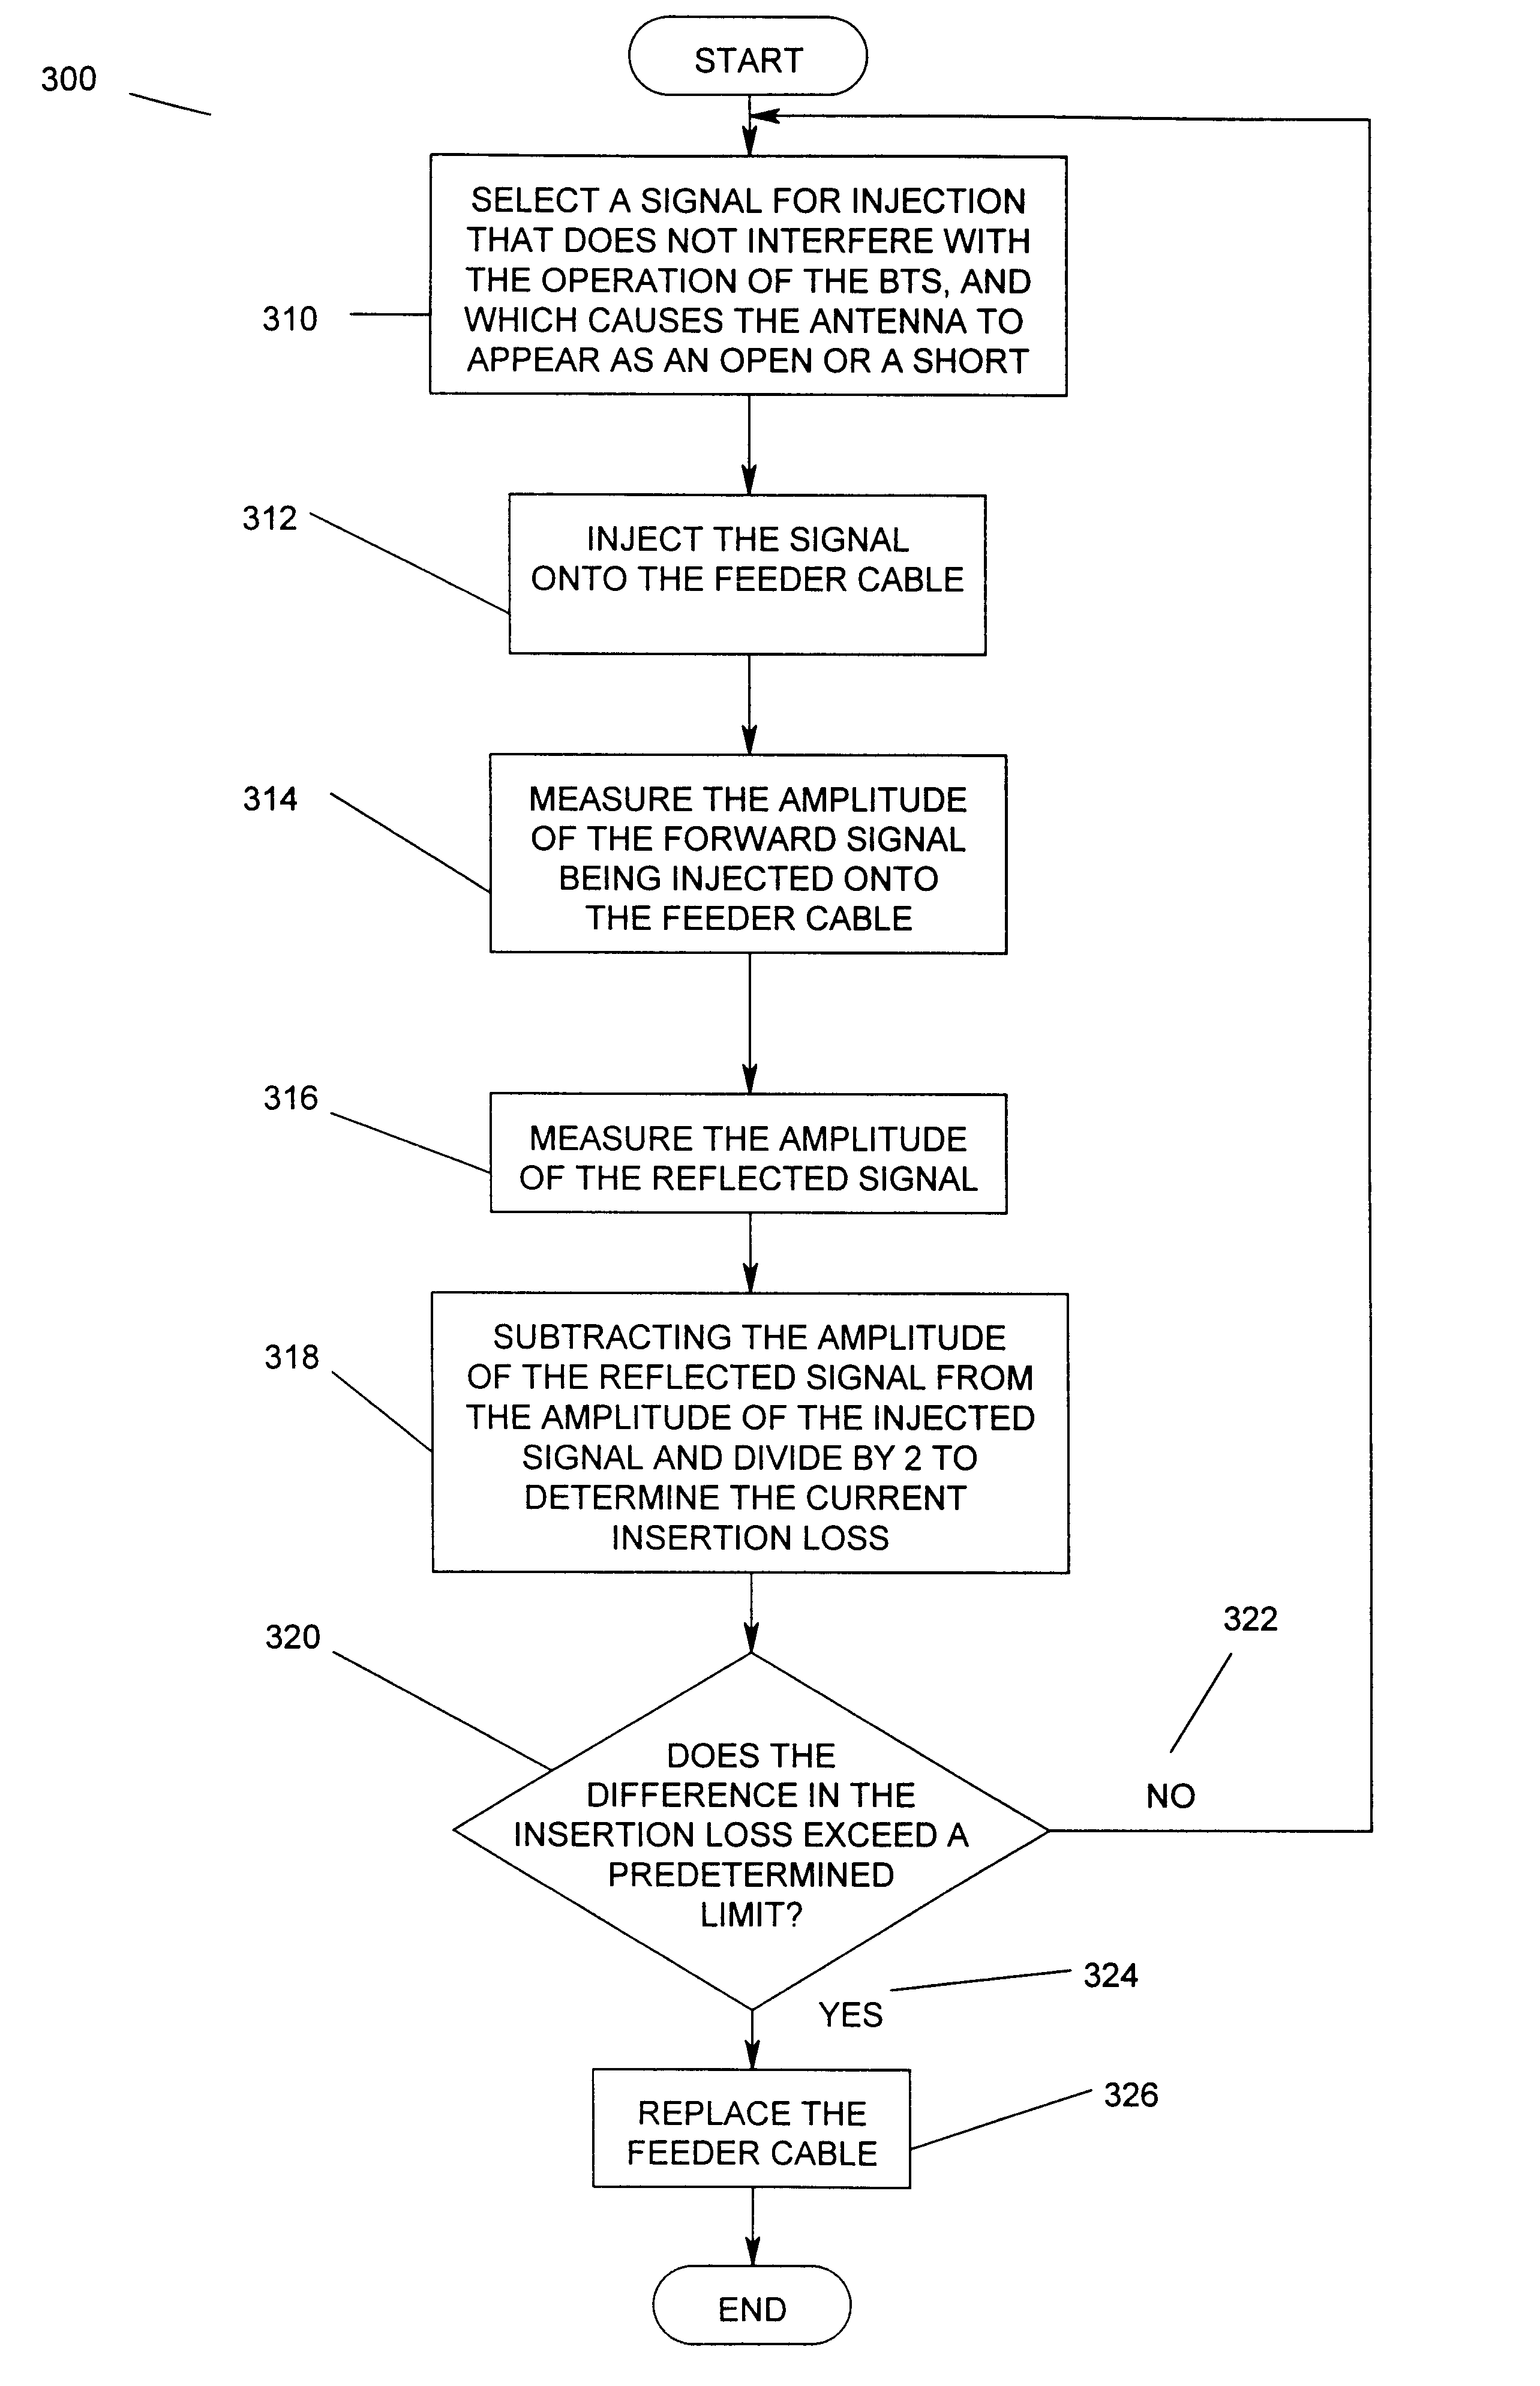 Method and apparatus for providing feeder cable insertion loss detection in a transmission system without interfering with normal operation